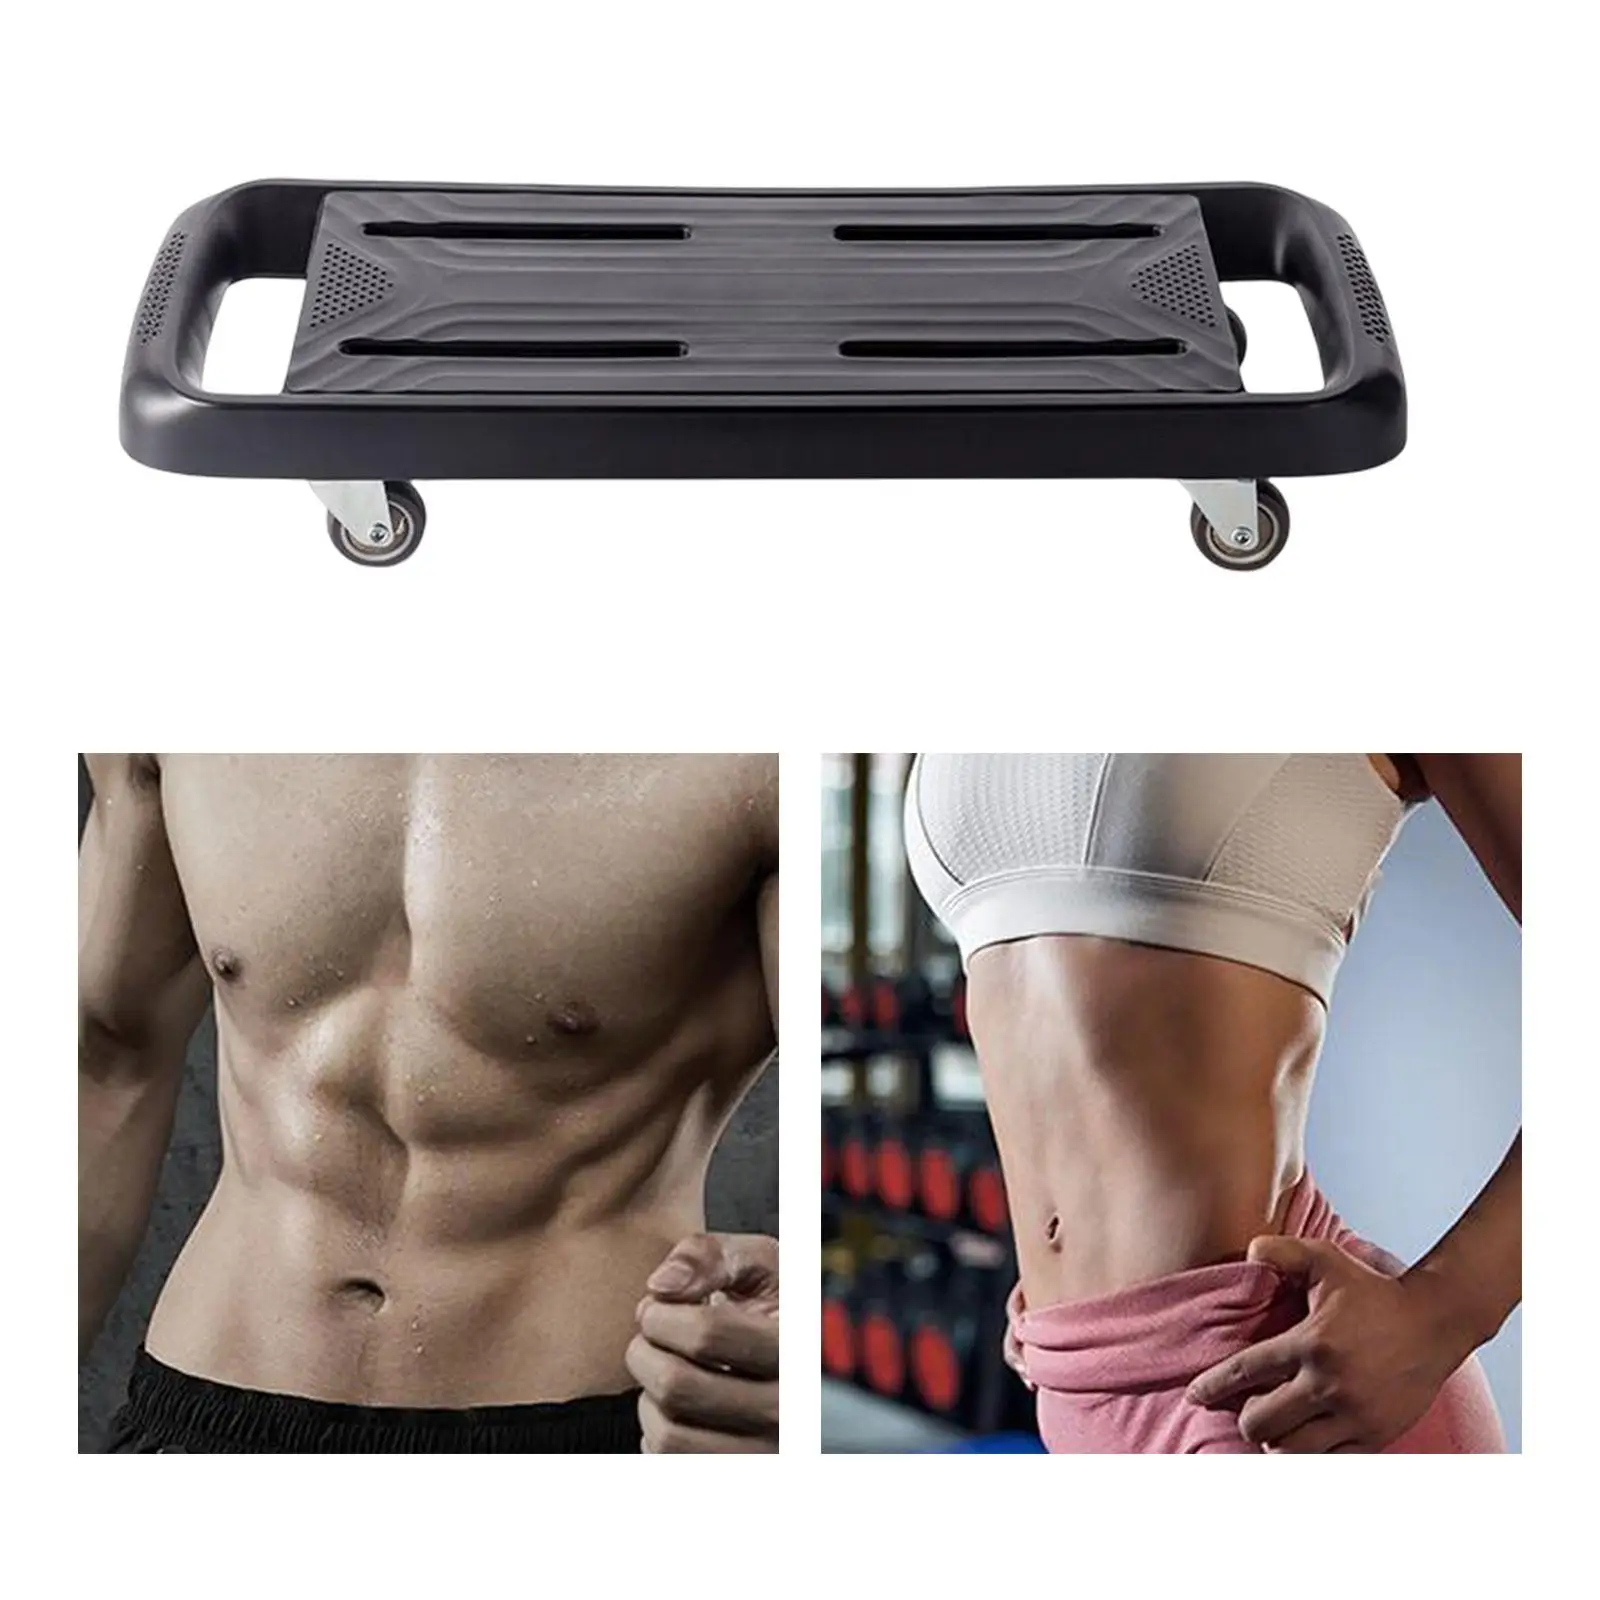 Board Core Workout Training Gym Equipment for Fitness Ab Training